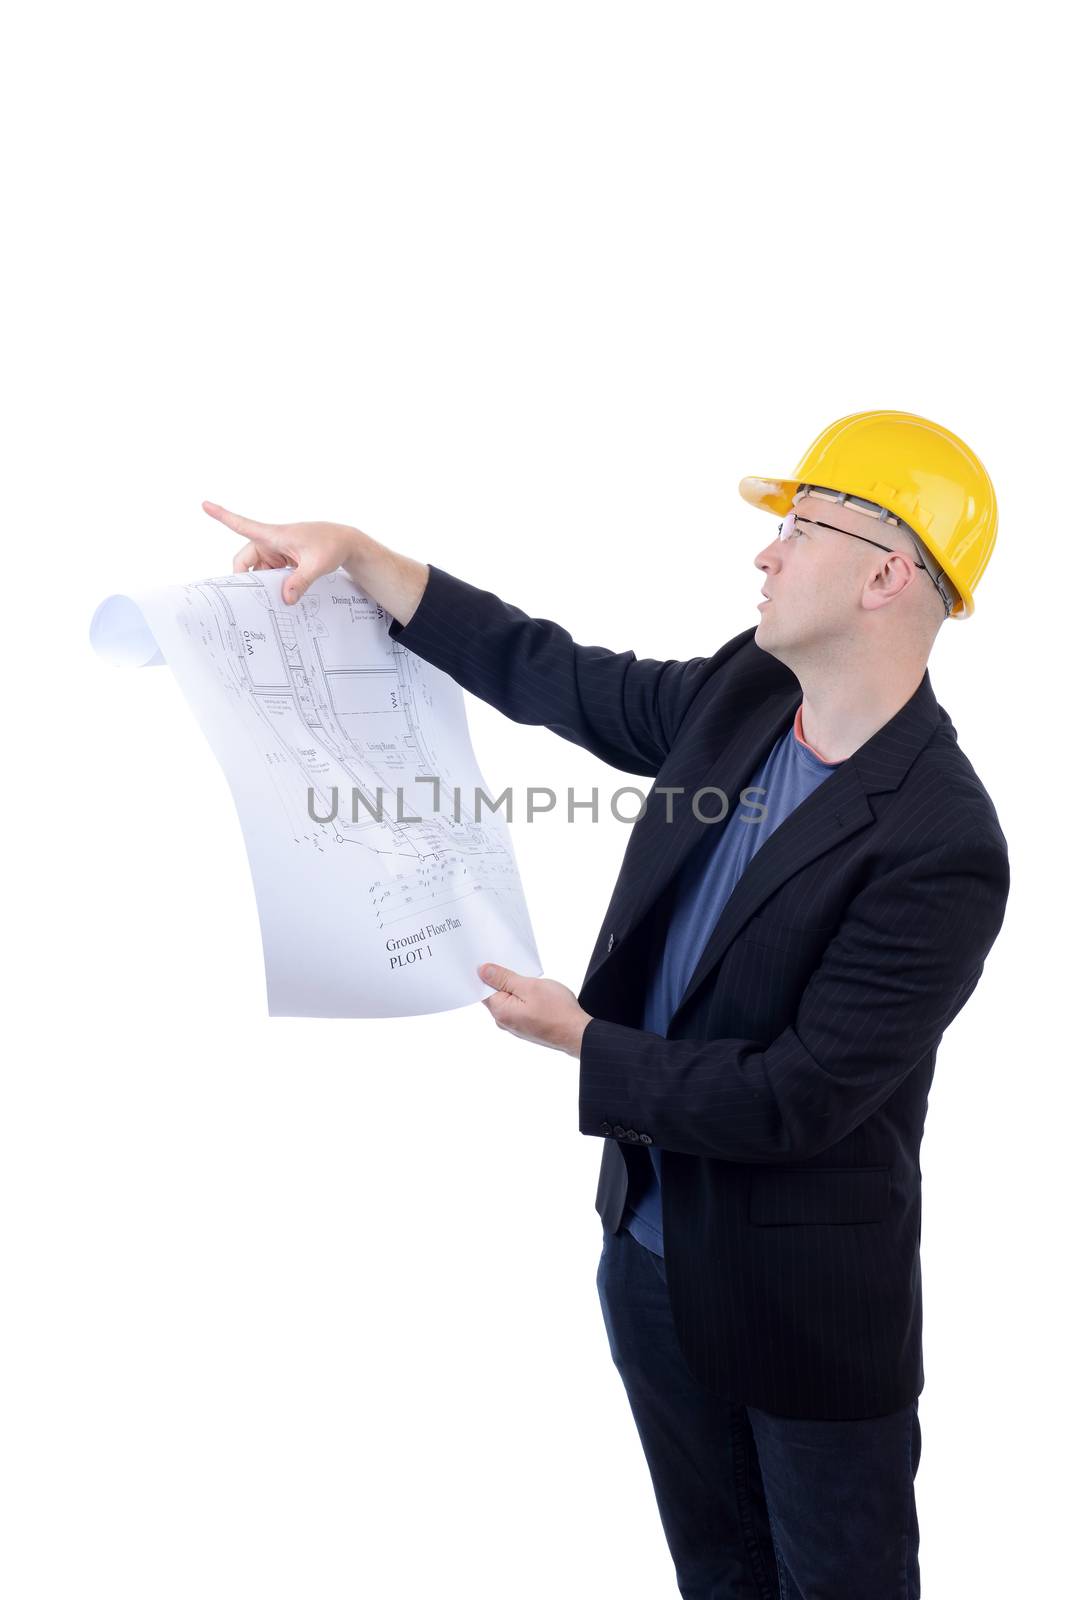 engineer or architect with plans gesturing all good with thumbs up isolated on white background